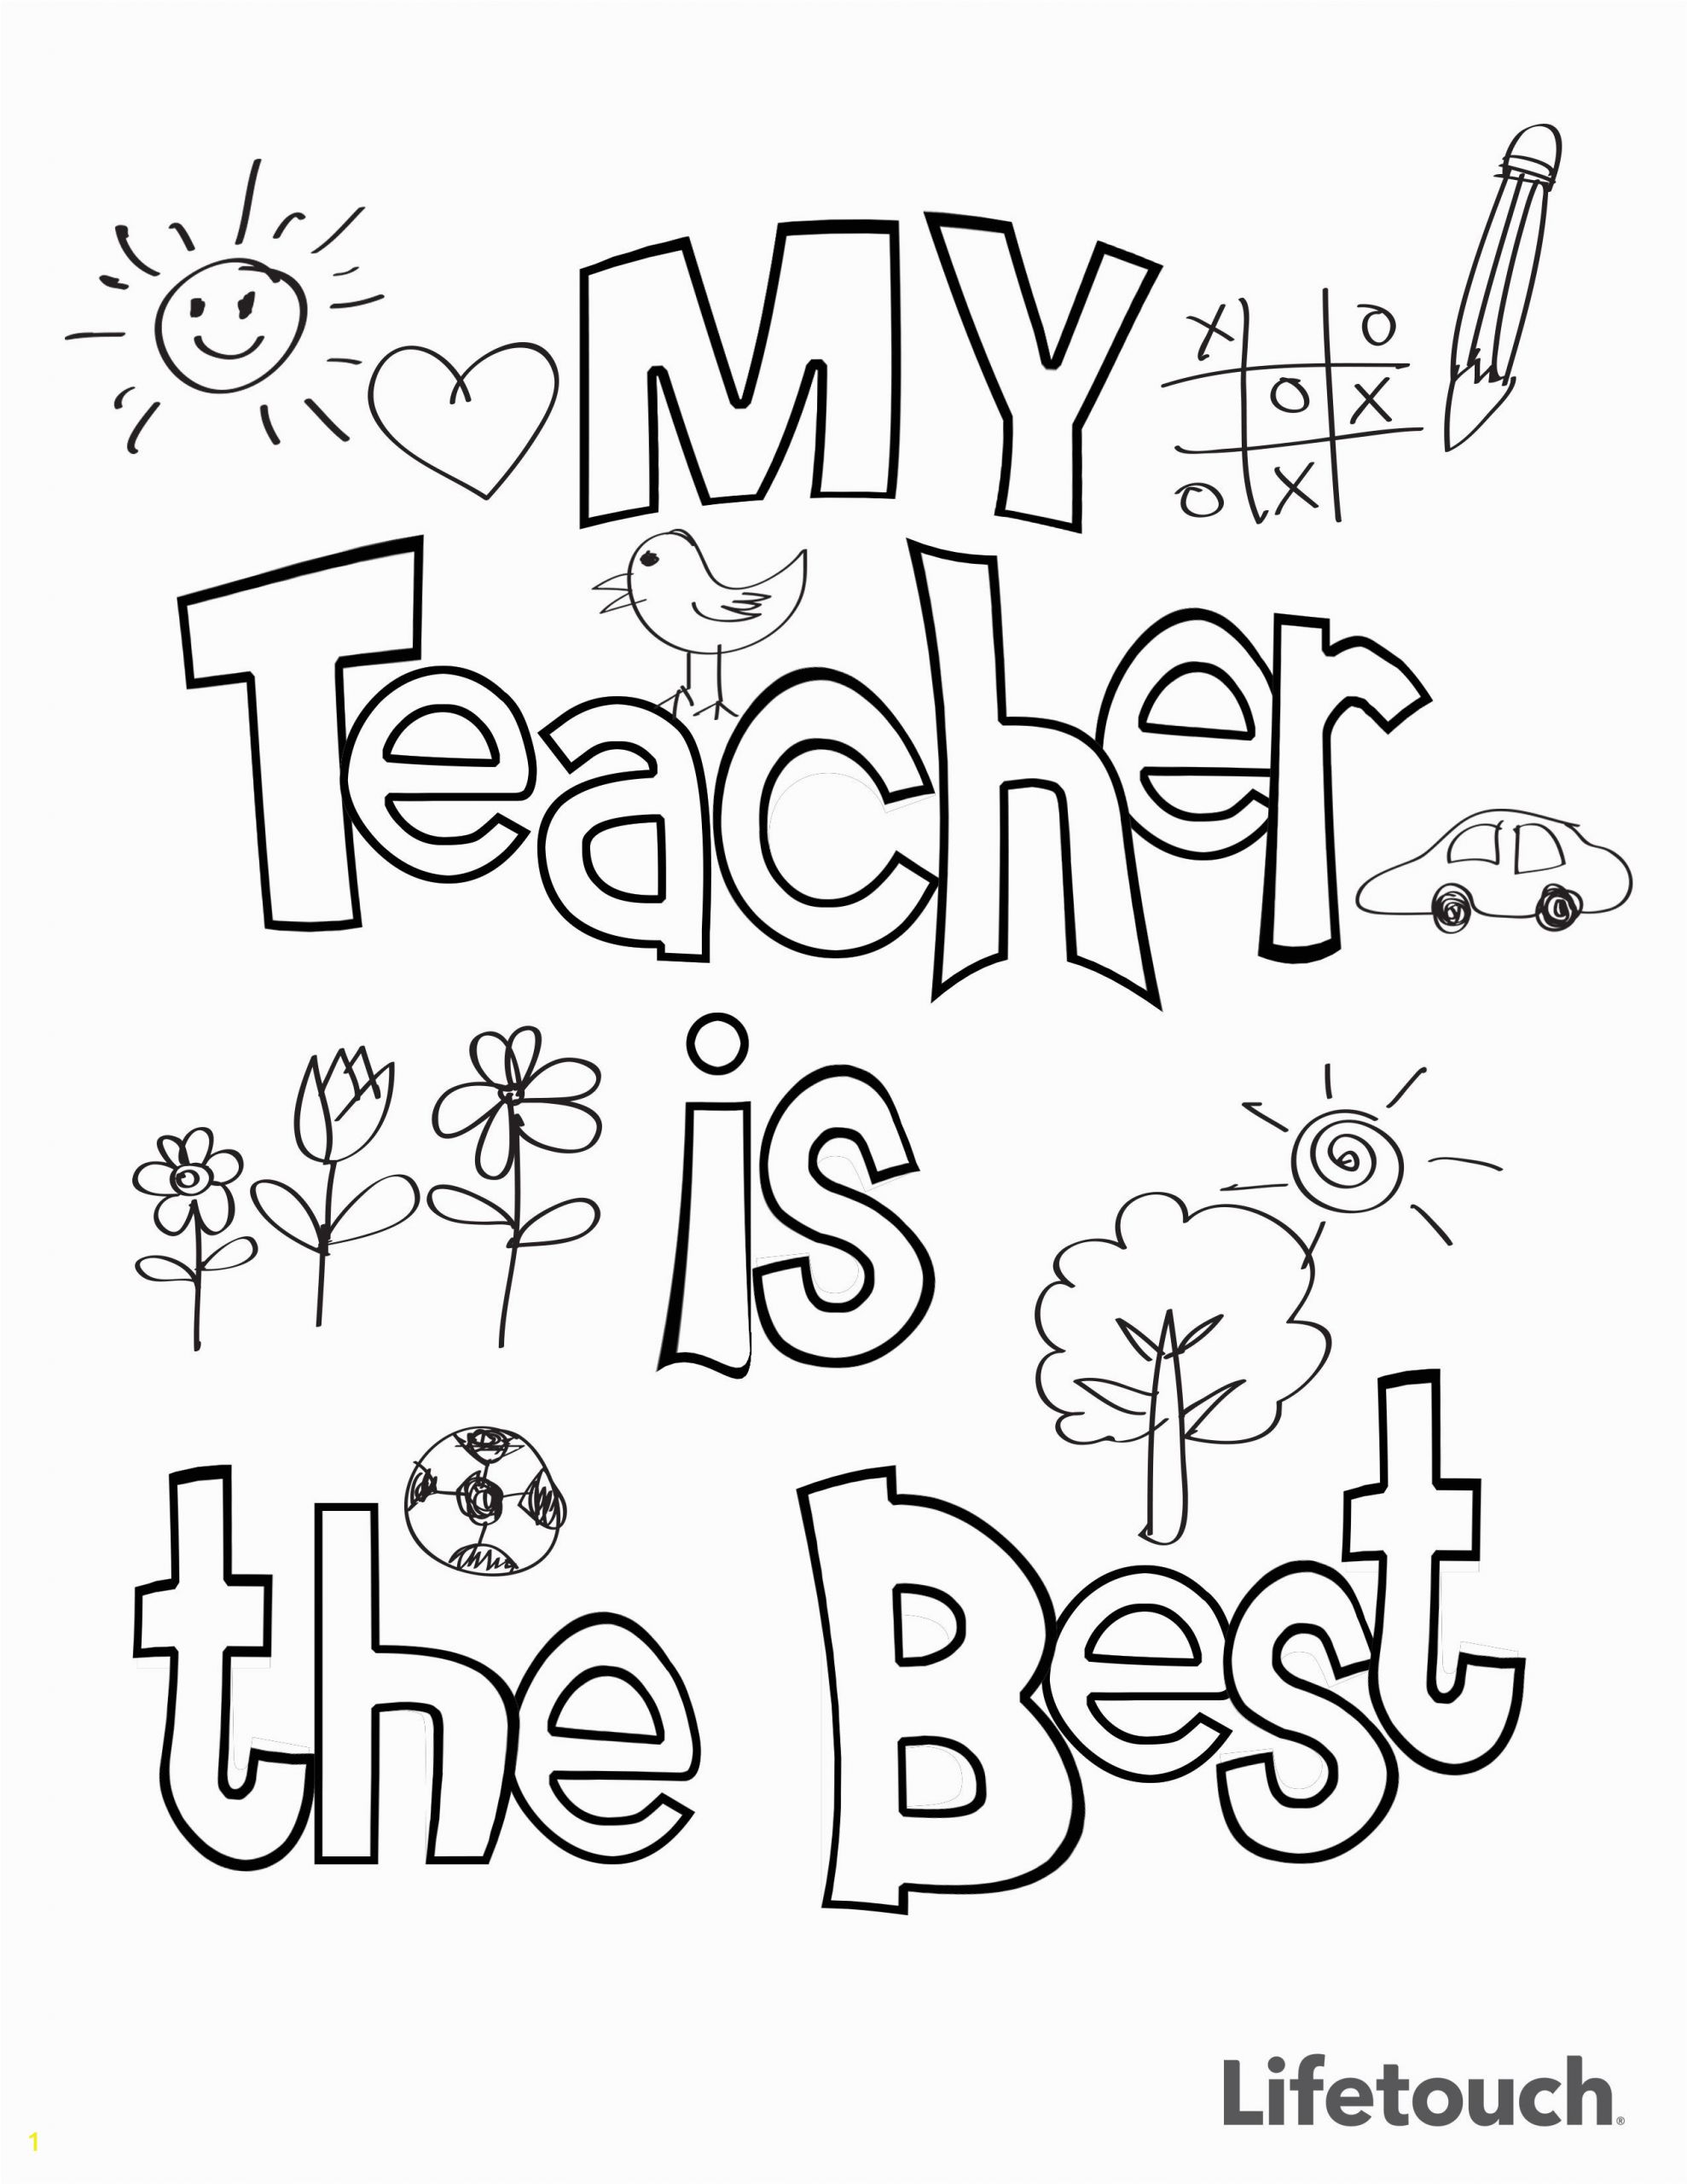 Coloring Pages for College Students Teacher Appreciation Coloring Sheet with Images